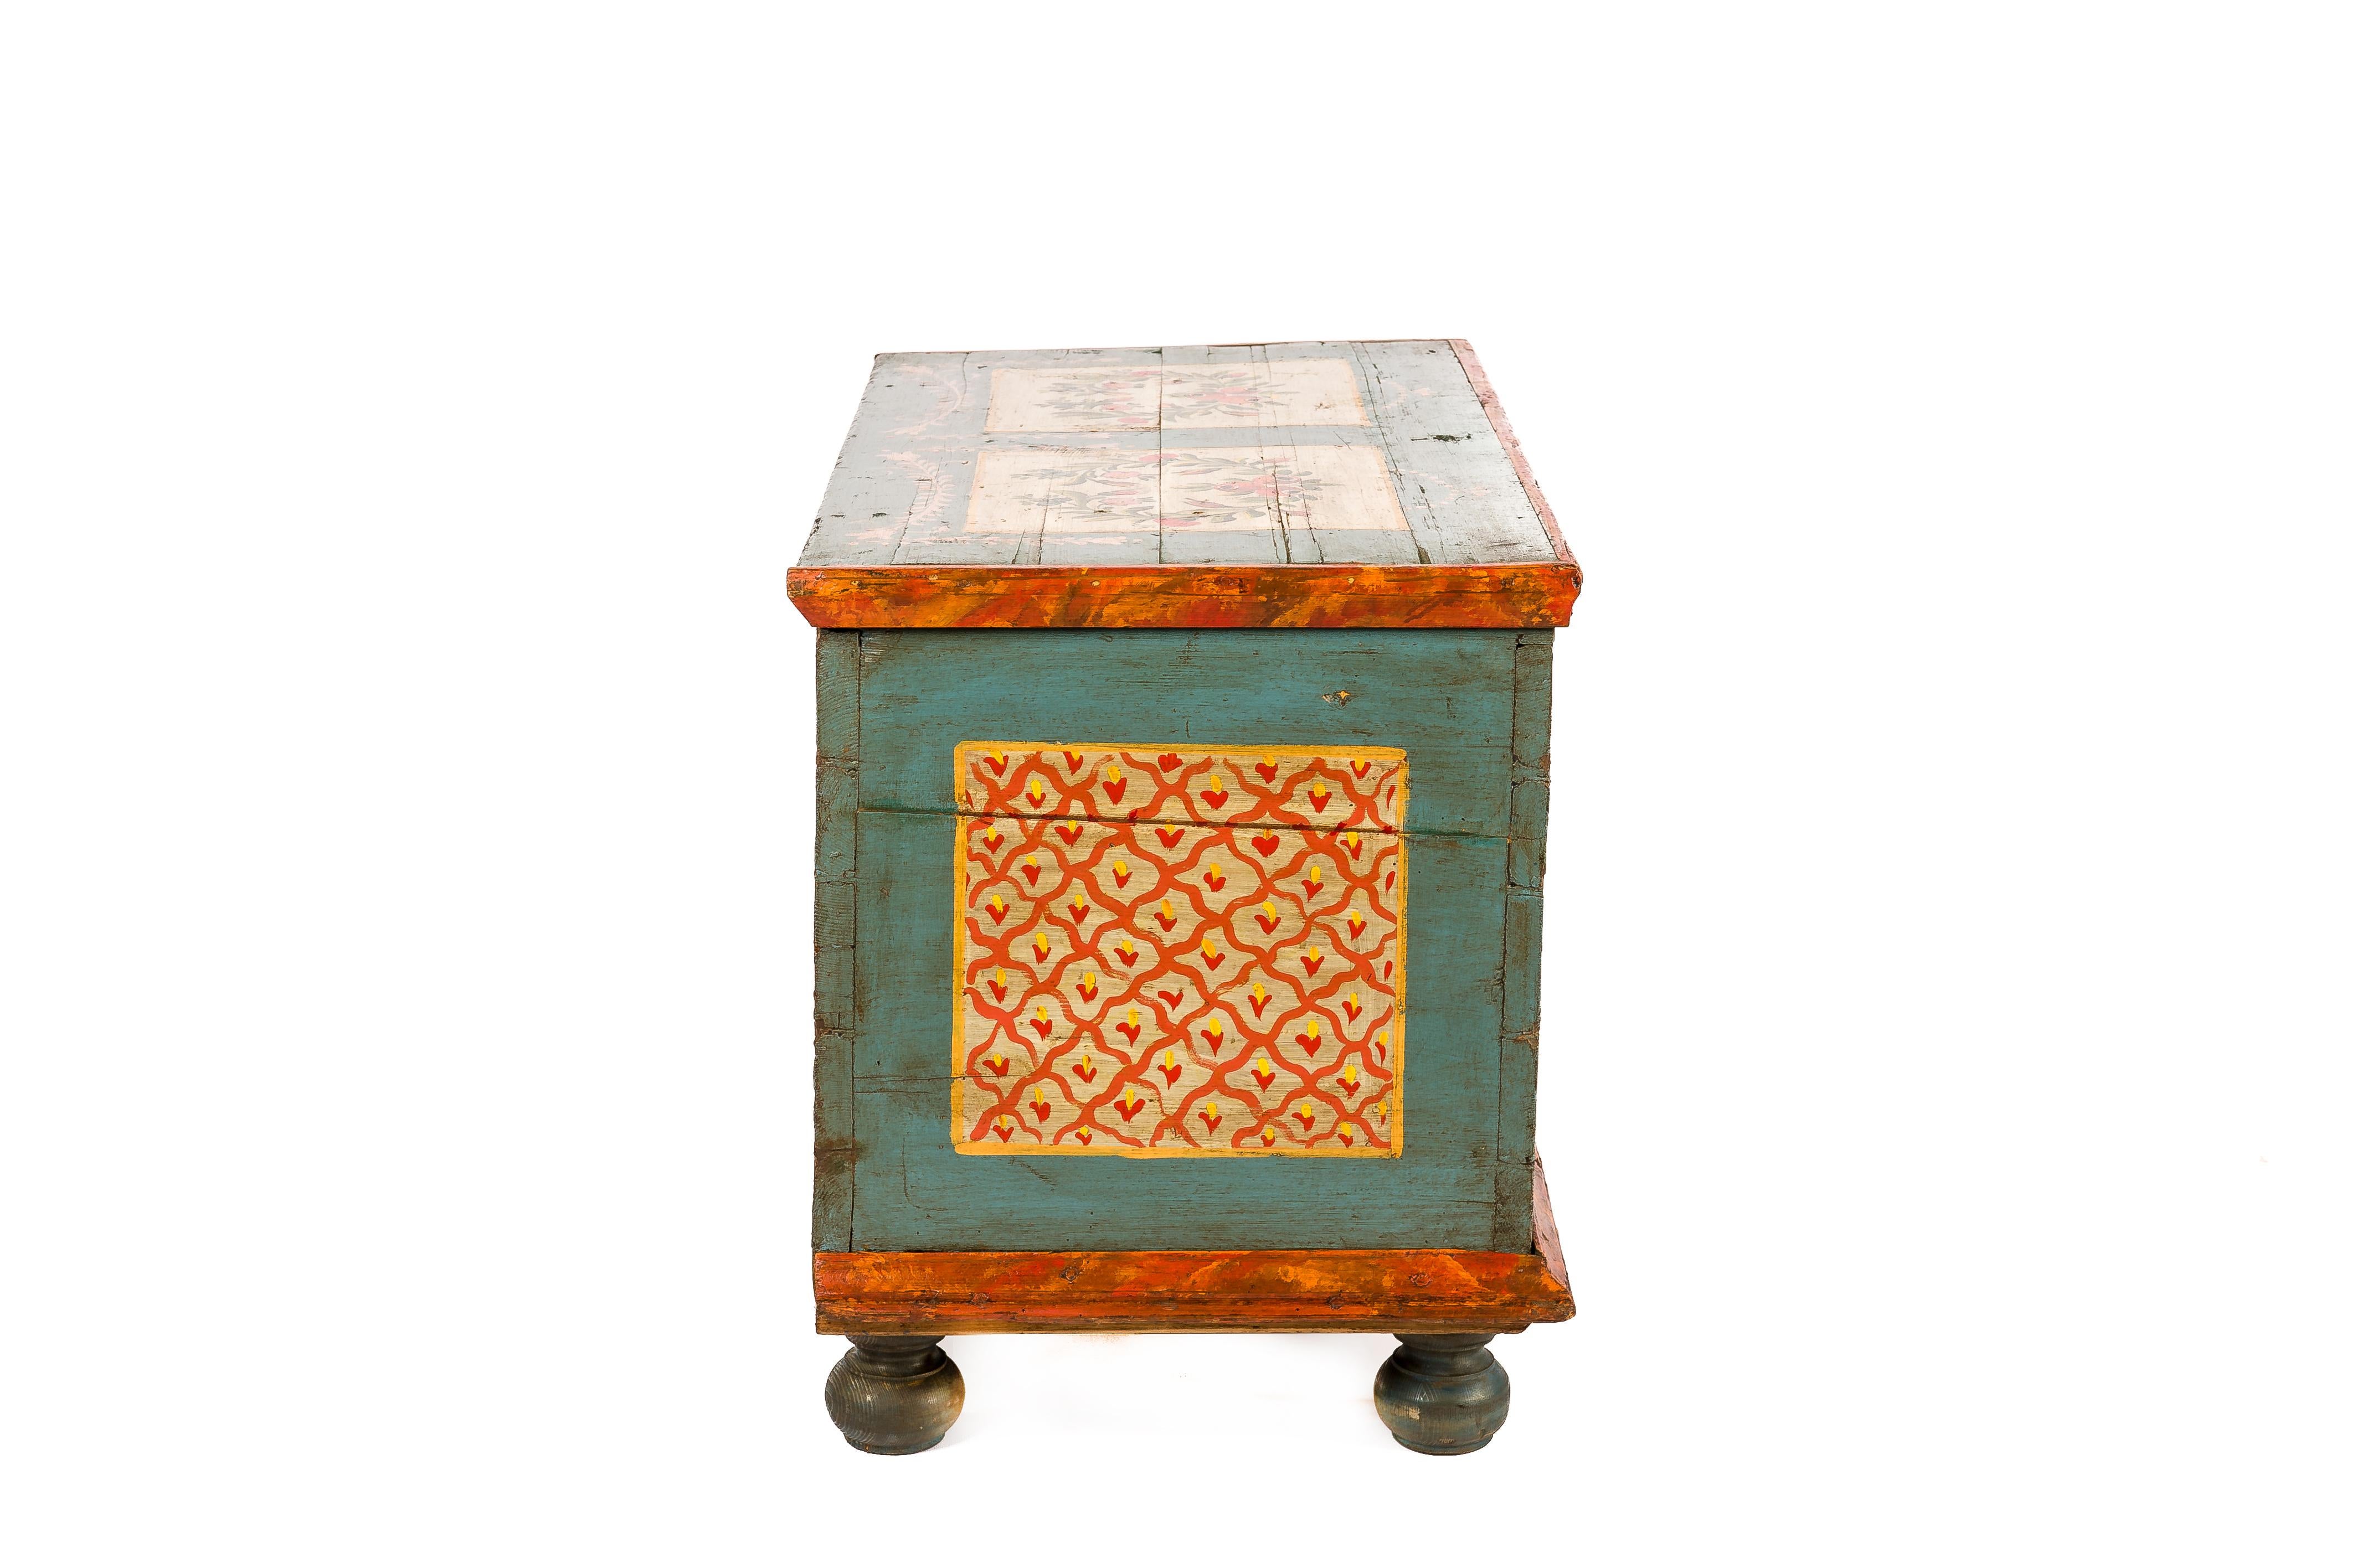 Early 19th Century Antique 19th-century solid pine and traditional painted Bohemian trunk or chest